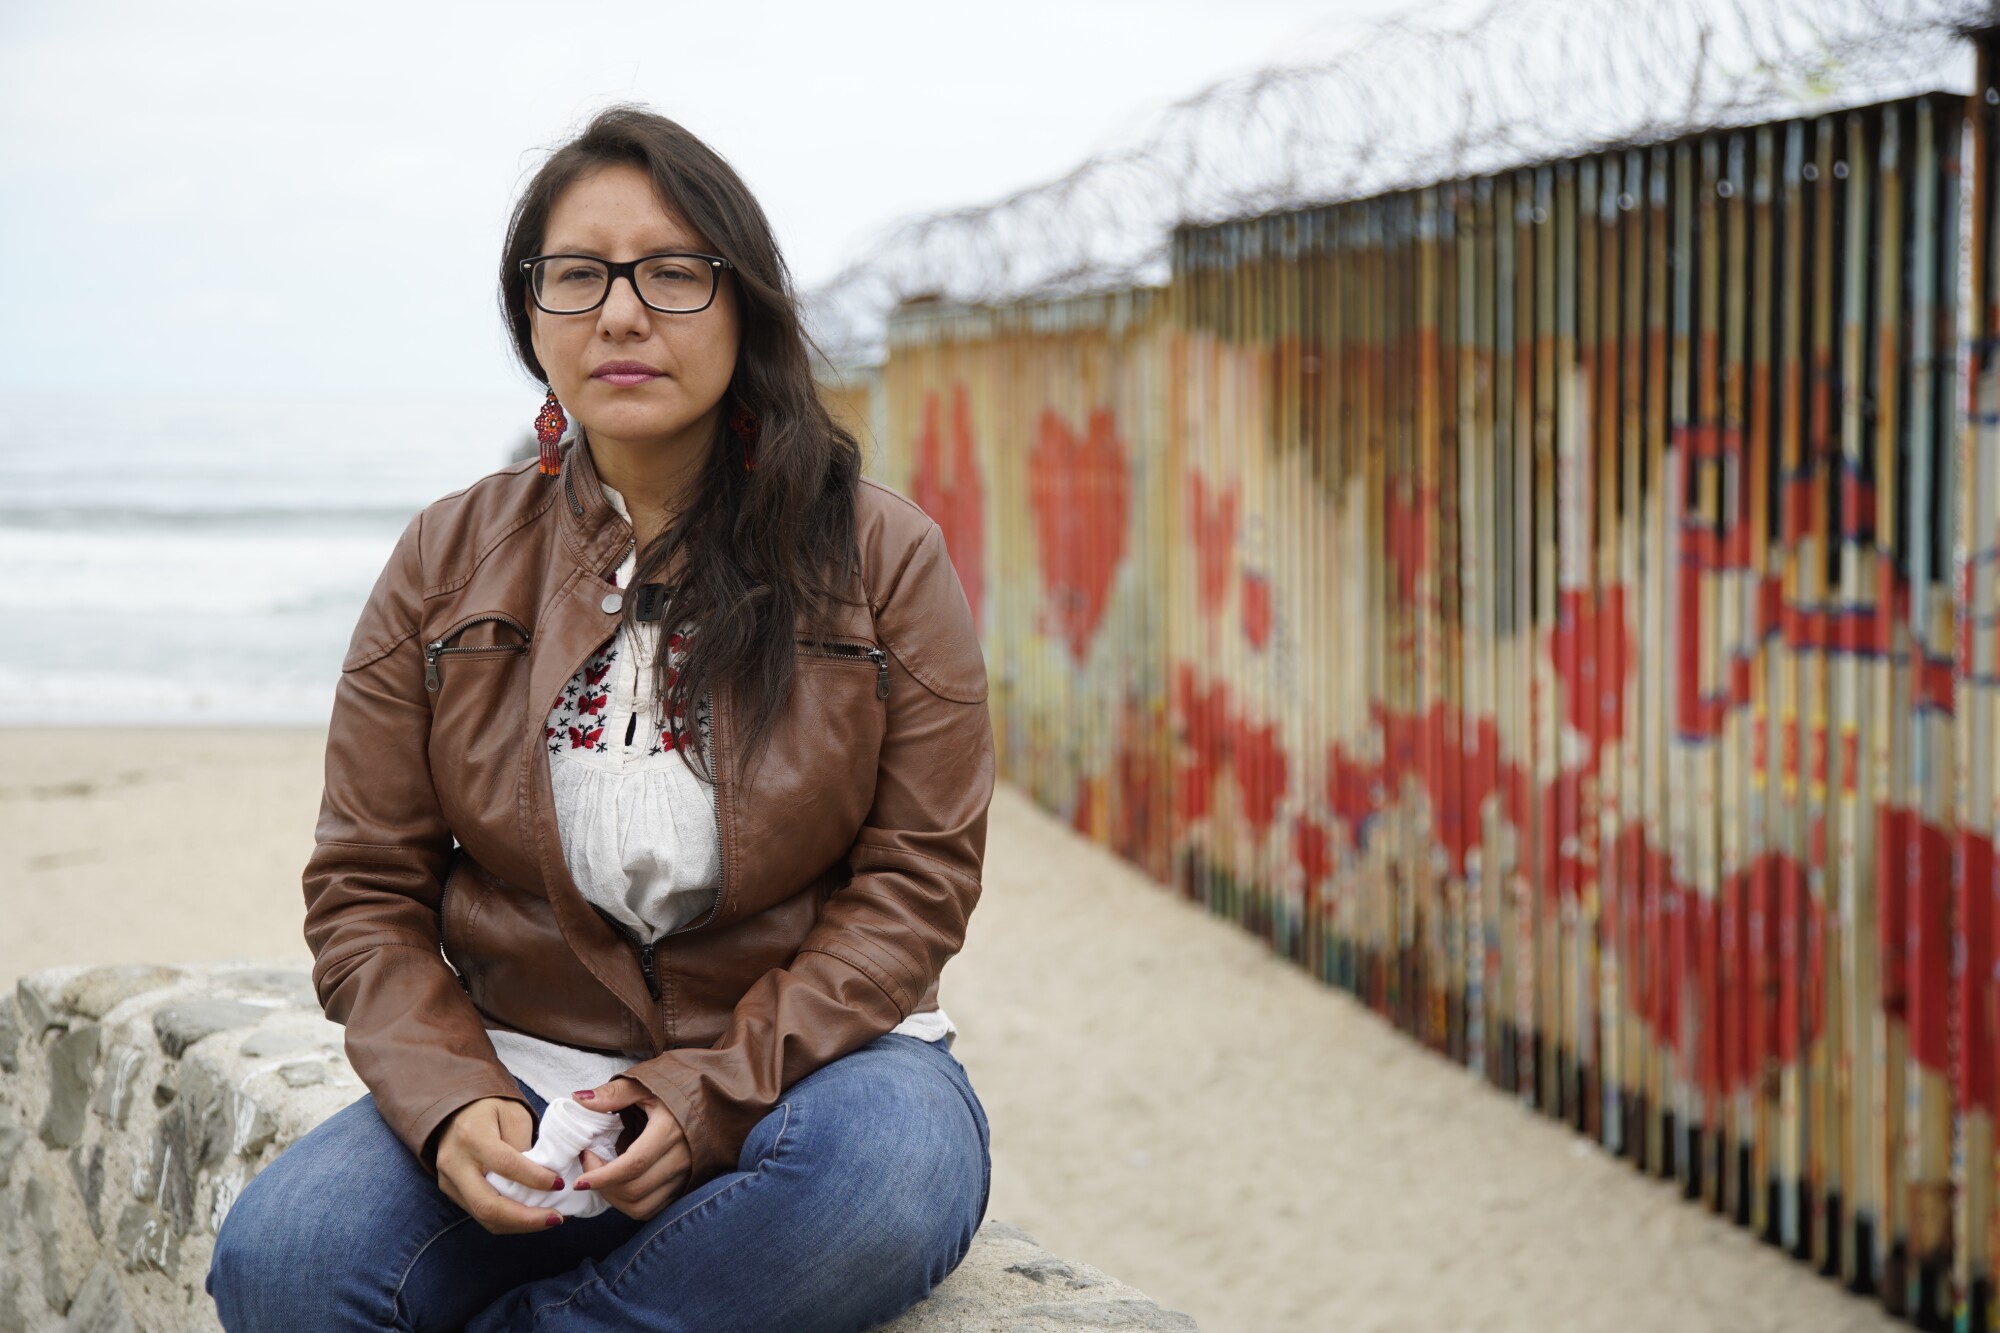 Dulce Garcia sits in front of the painted border fence